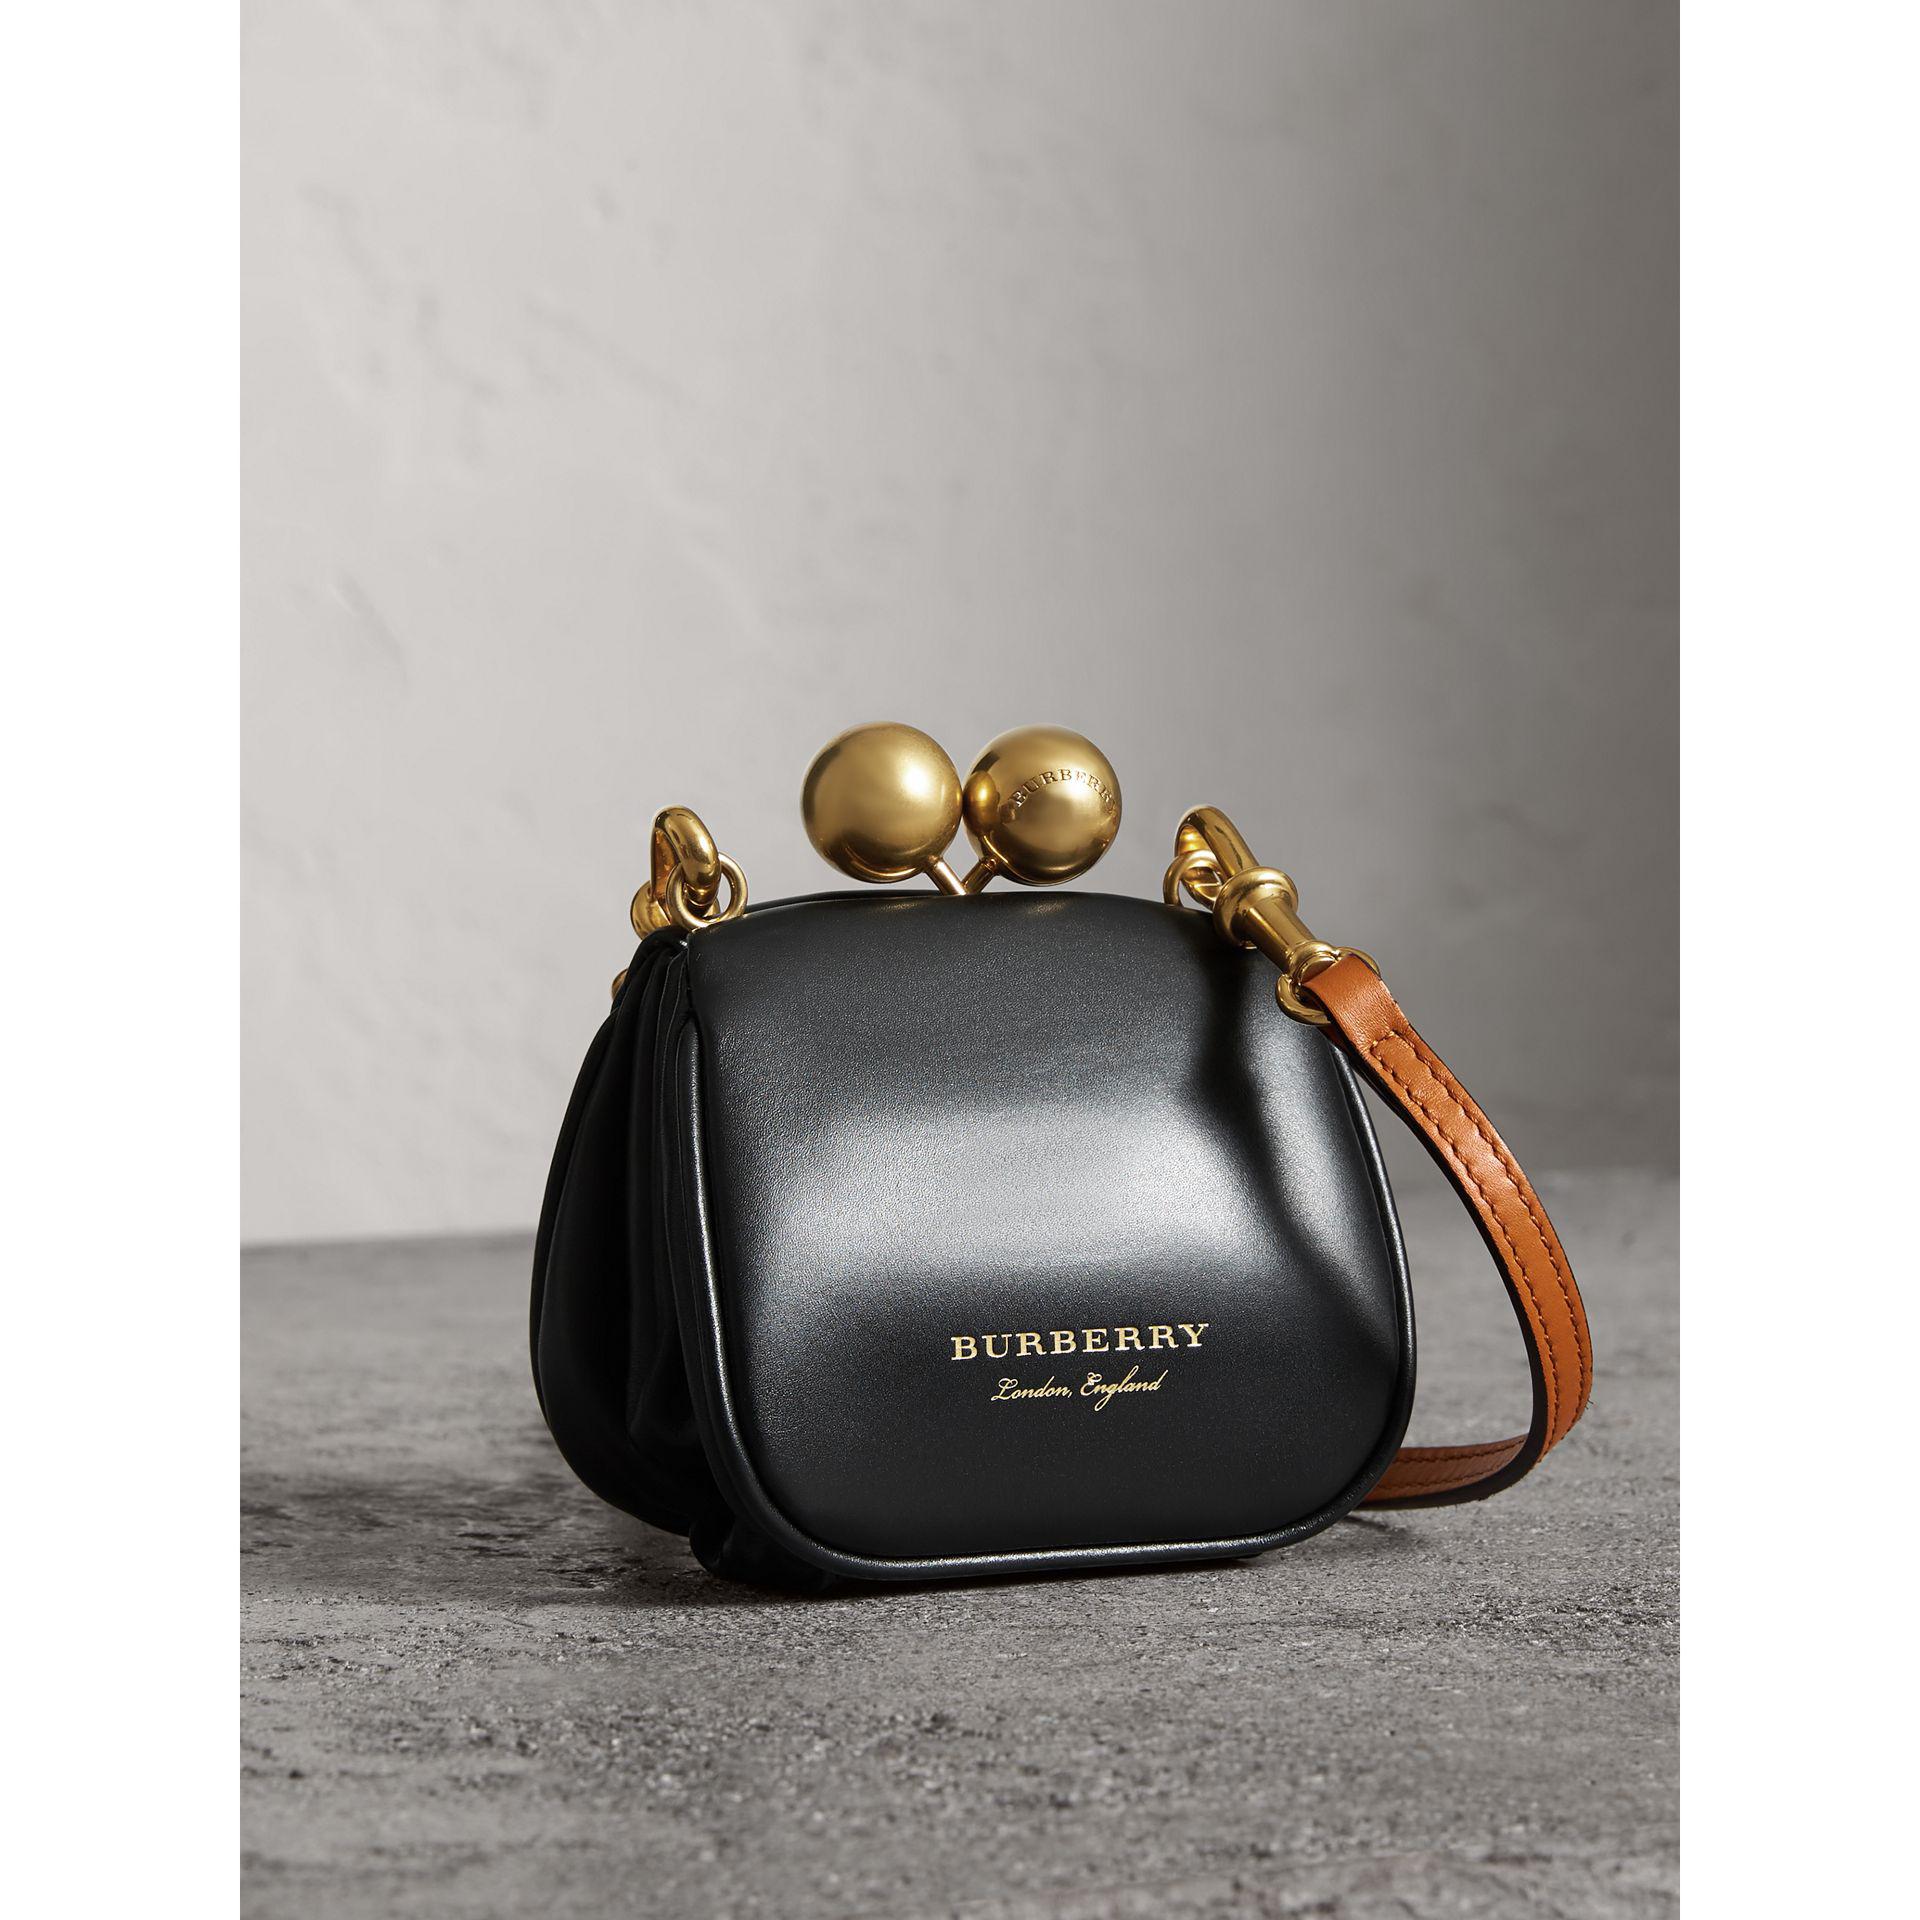 Actualizar 88+ imagen burberry mini two tone leather frame bag